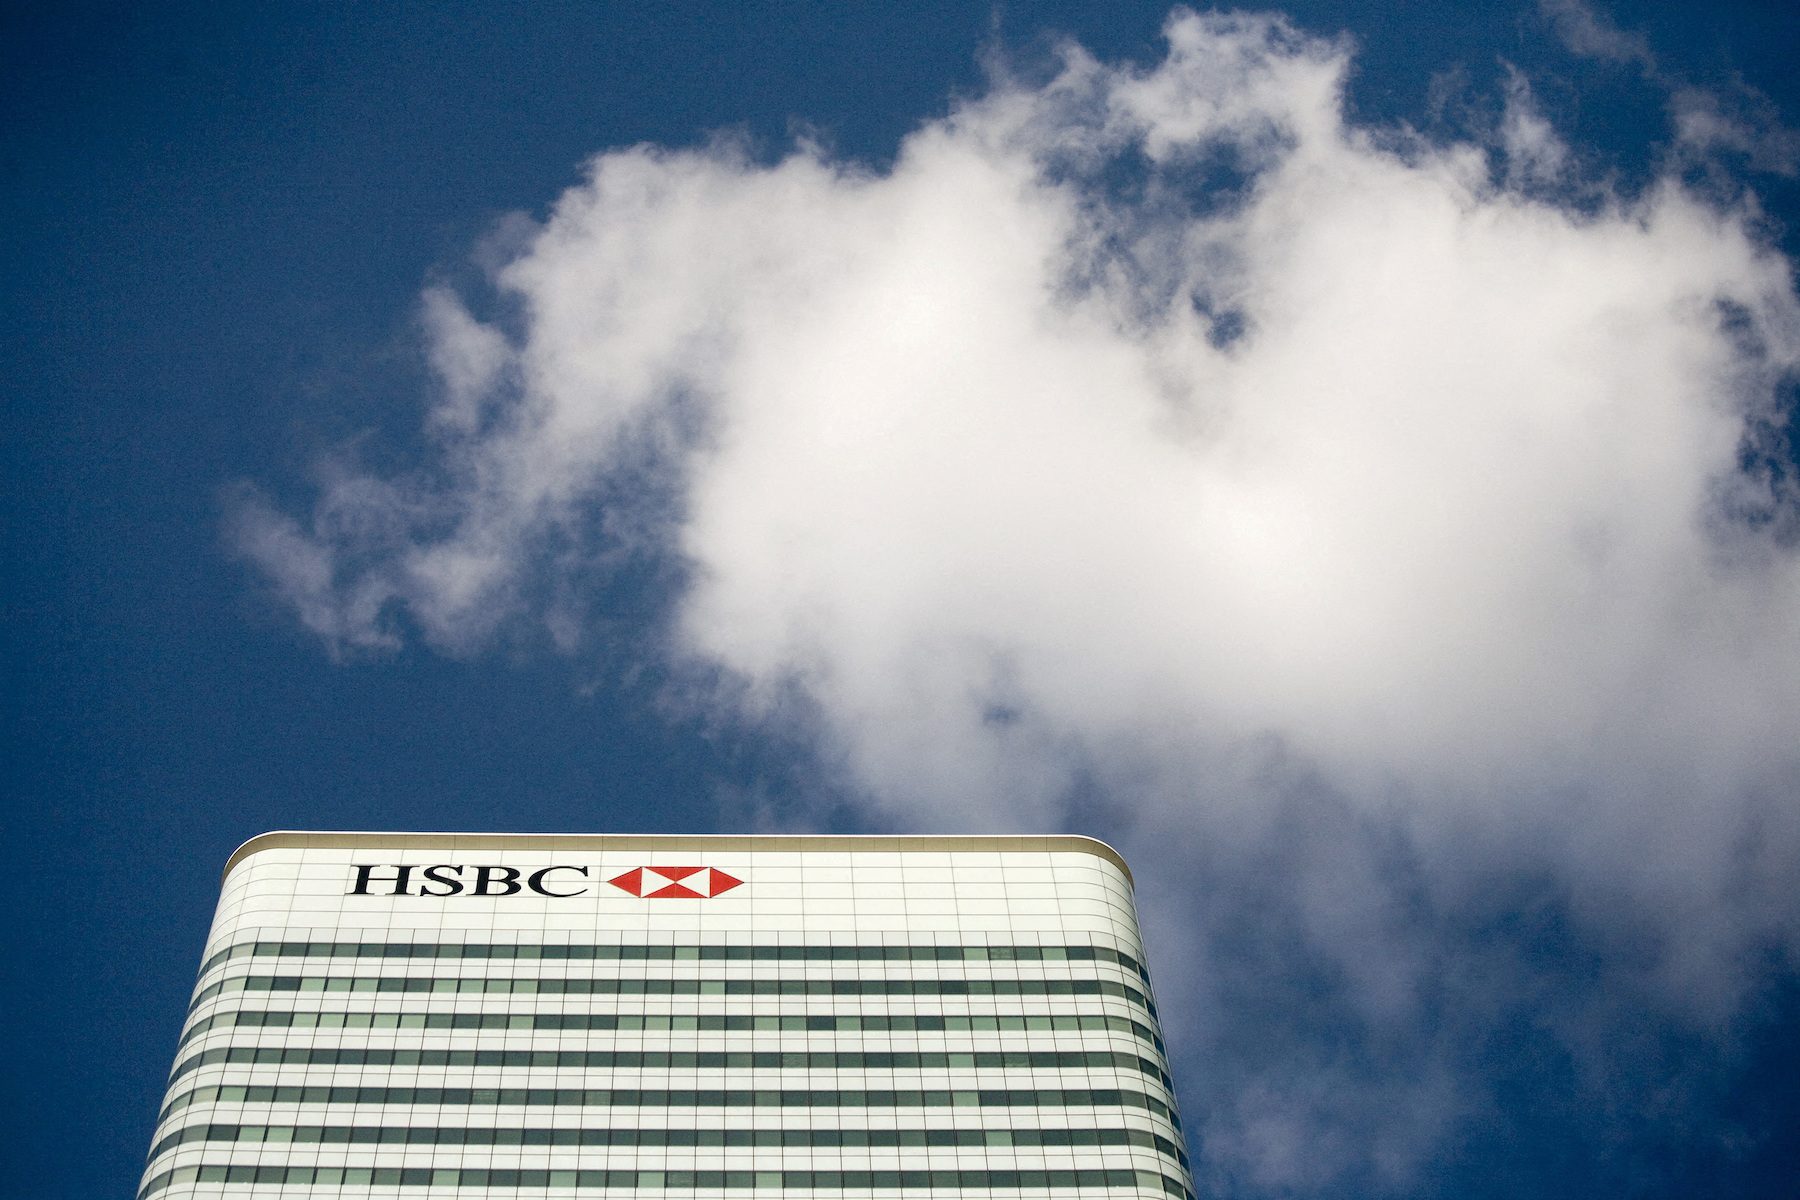 HSBC signals rate rise profit windfall has peaked even as payouts rise